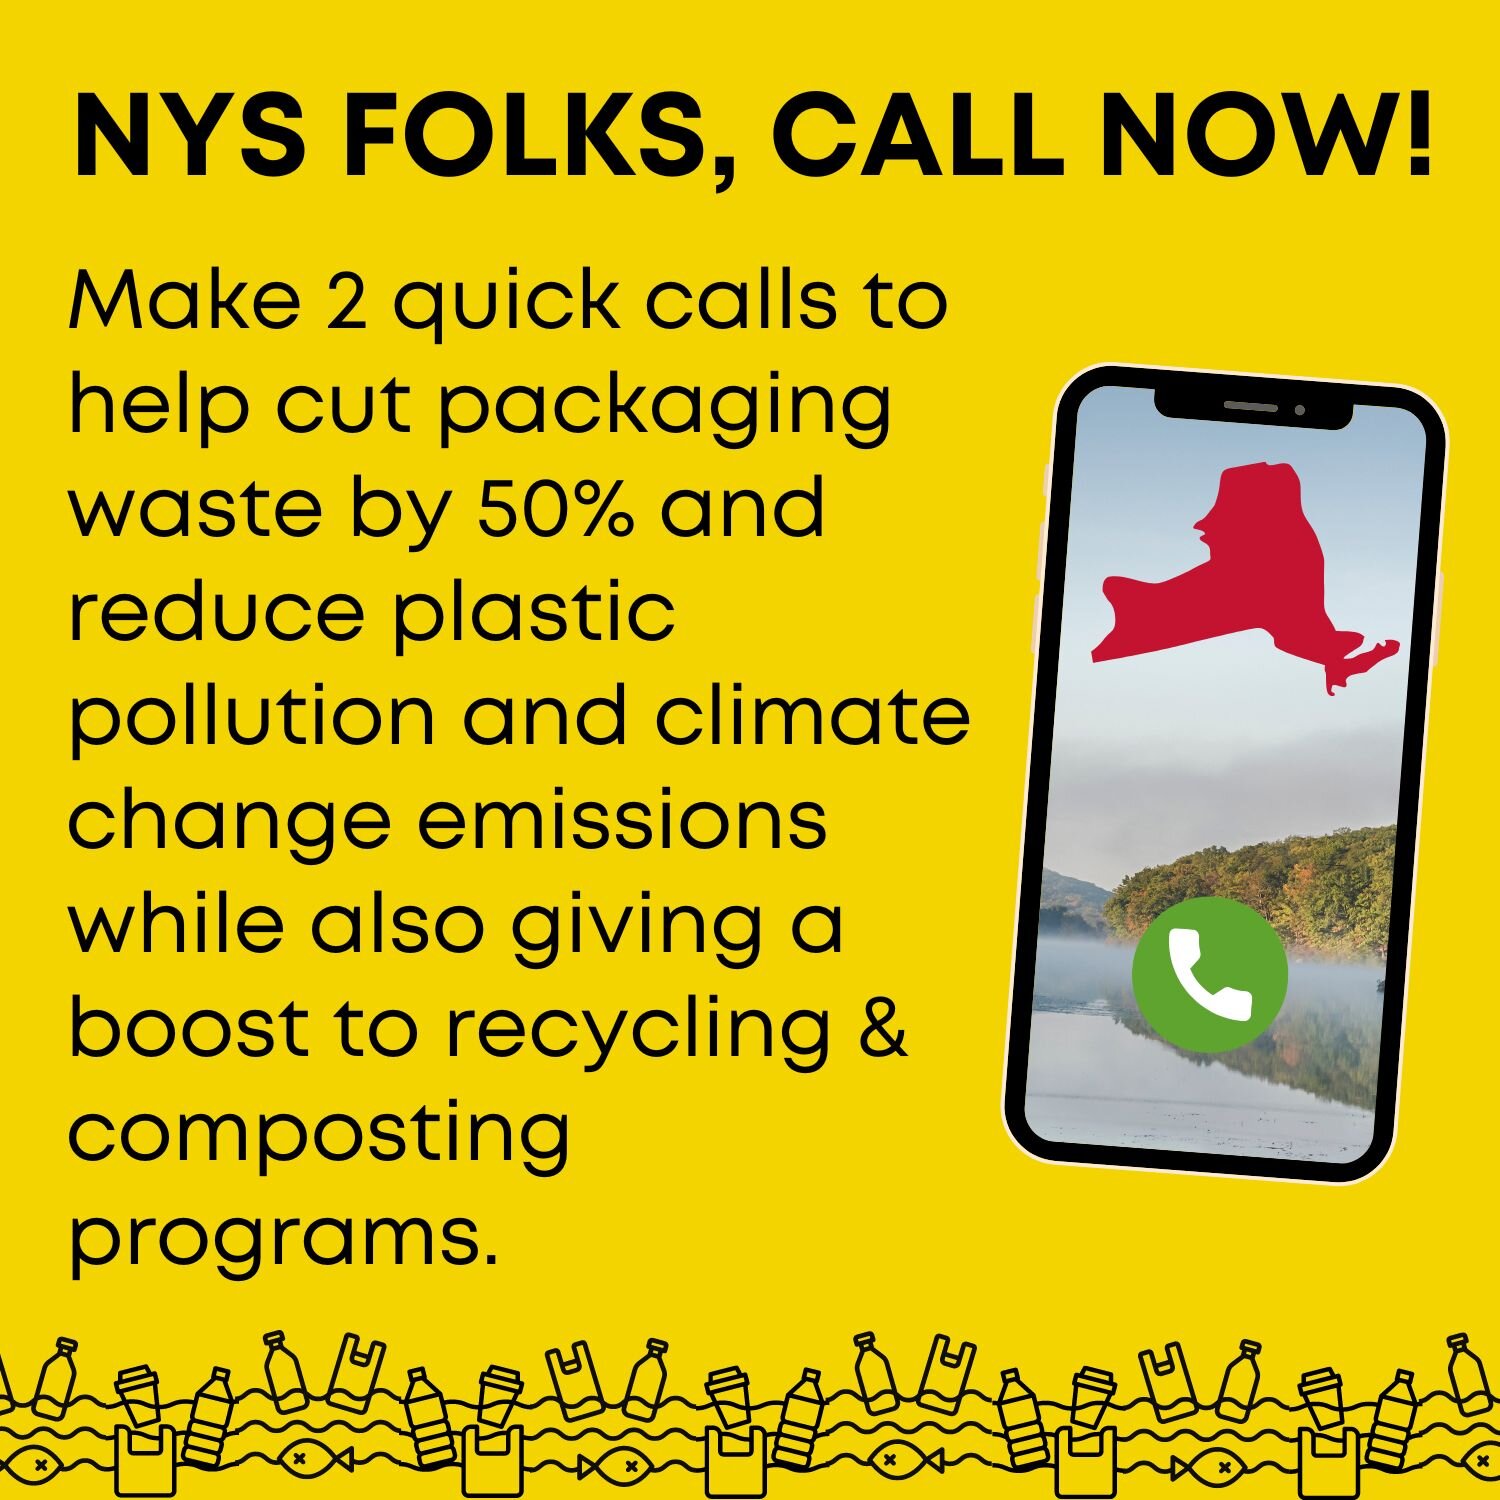 URGENT:📲NYS folks, please call your State Senator &amp; Assemblymember to urge them to co-sponsor and work to pass the Packaging Reduction &amp; Recycling Infrastructure Act &amp; Bigger Better Bottle Bill before session ends on June 8! Time is runn